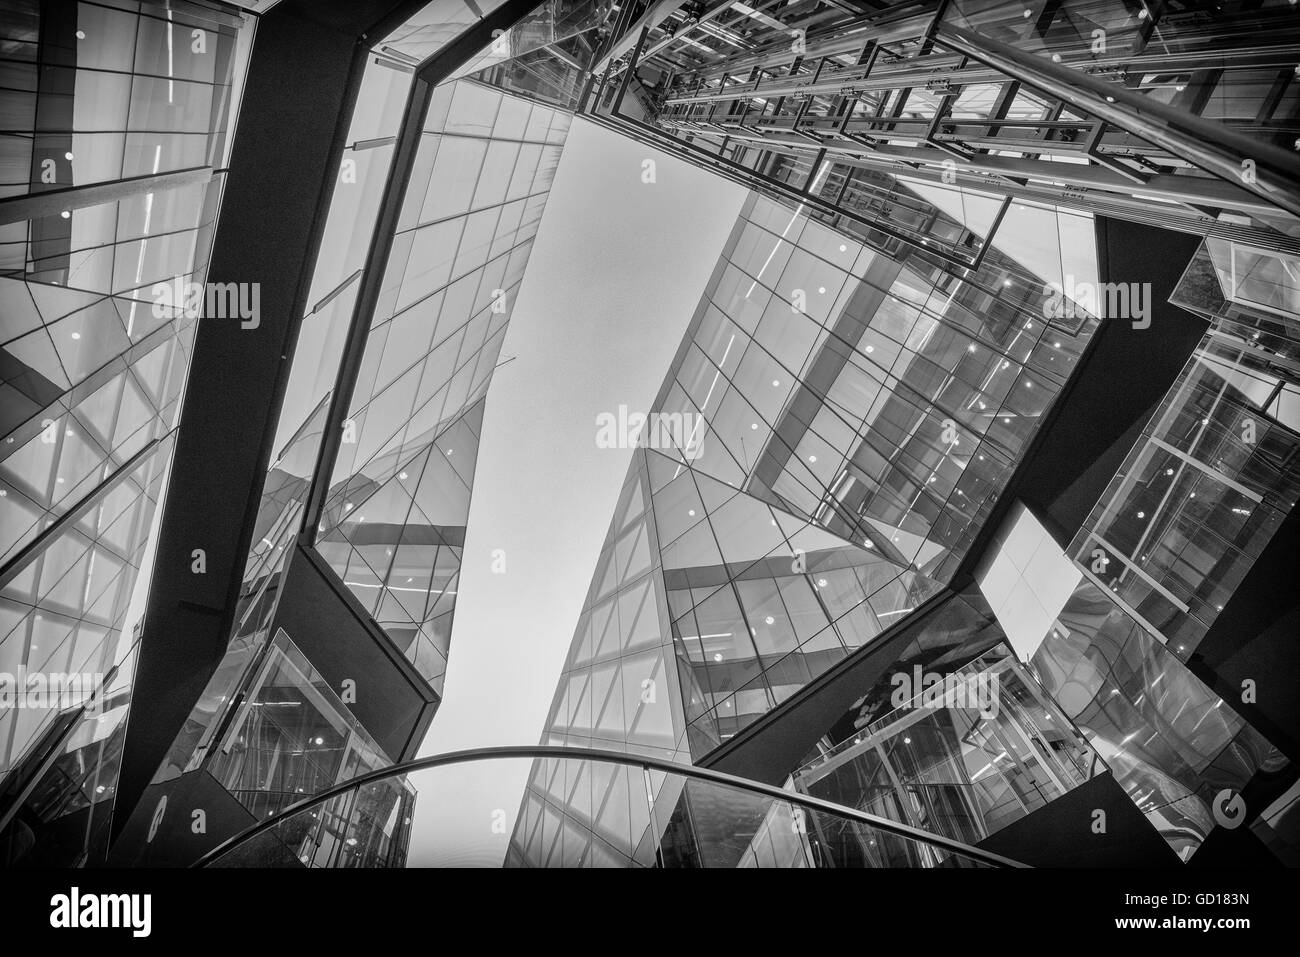 Reflections on glass structure of One New Change shopping mall near St. Paul's Cathedral in London. Stock Photo